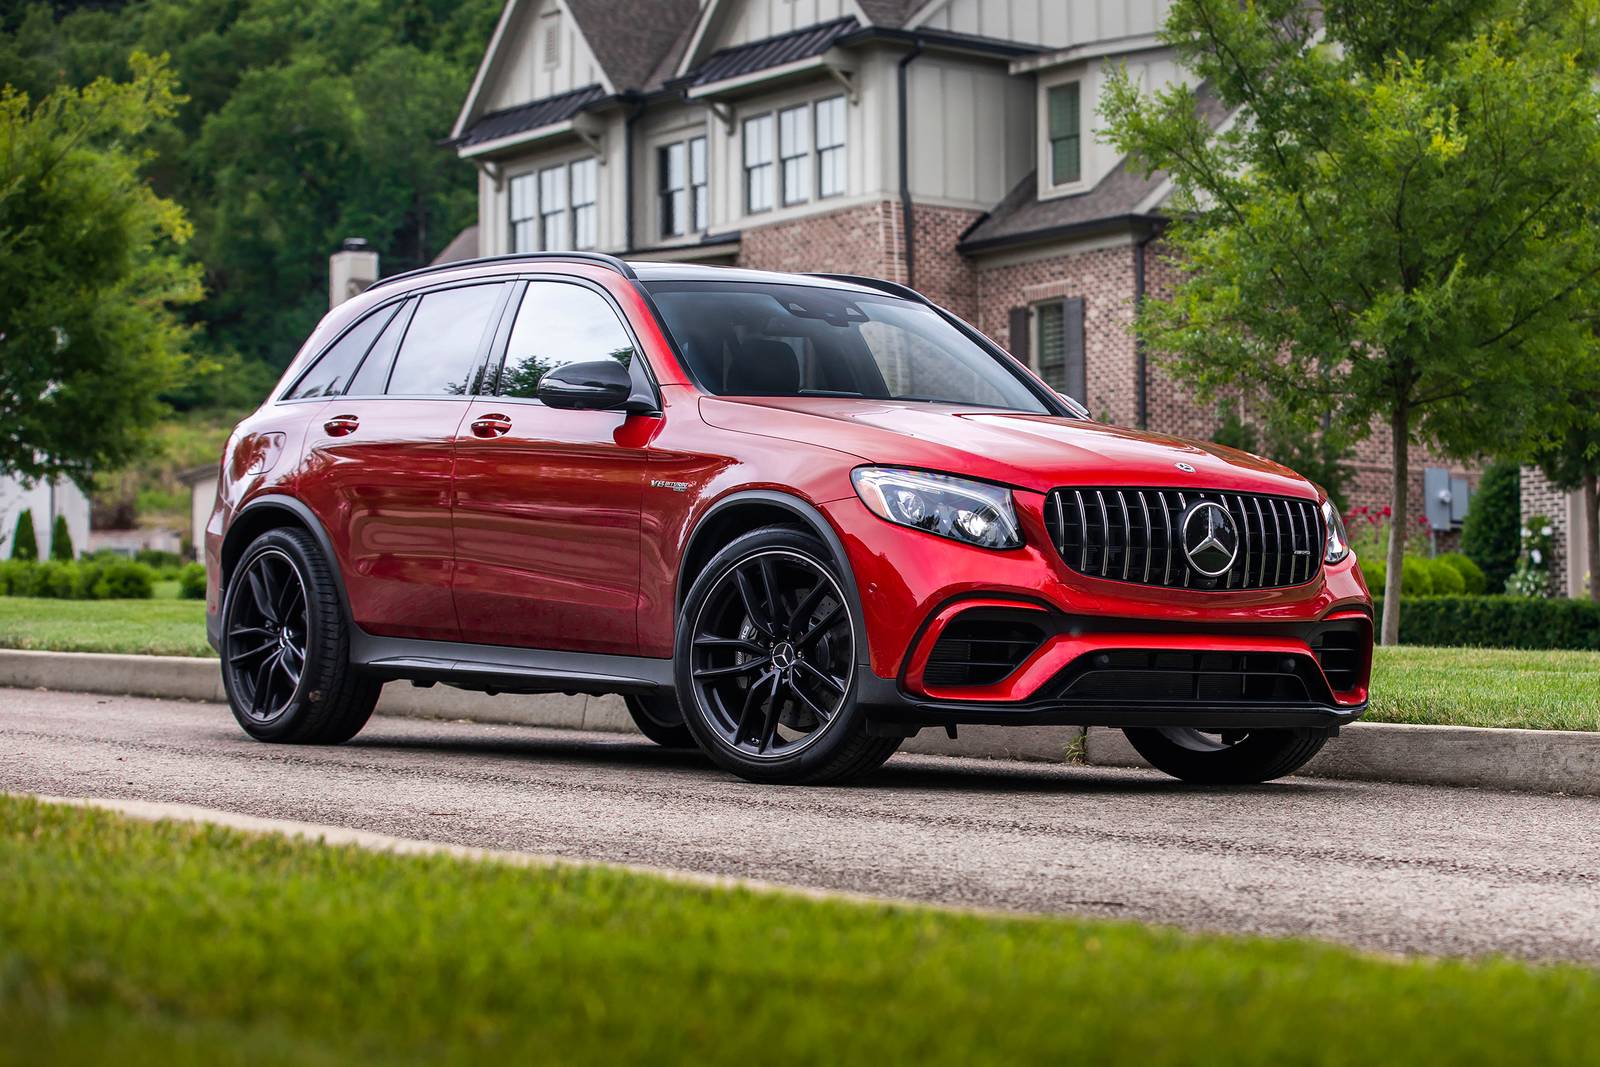 Used 2019 Mercedes-Benz GLC-Class AMG GLC 63 Review | Edmunds